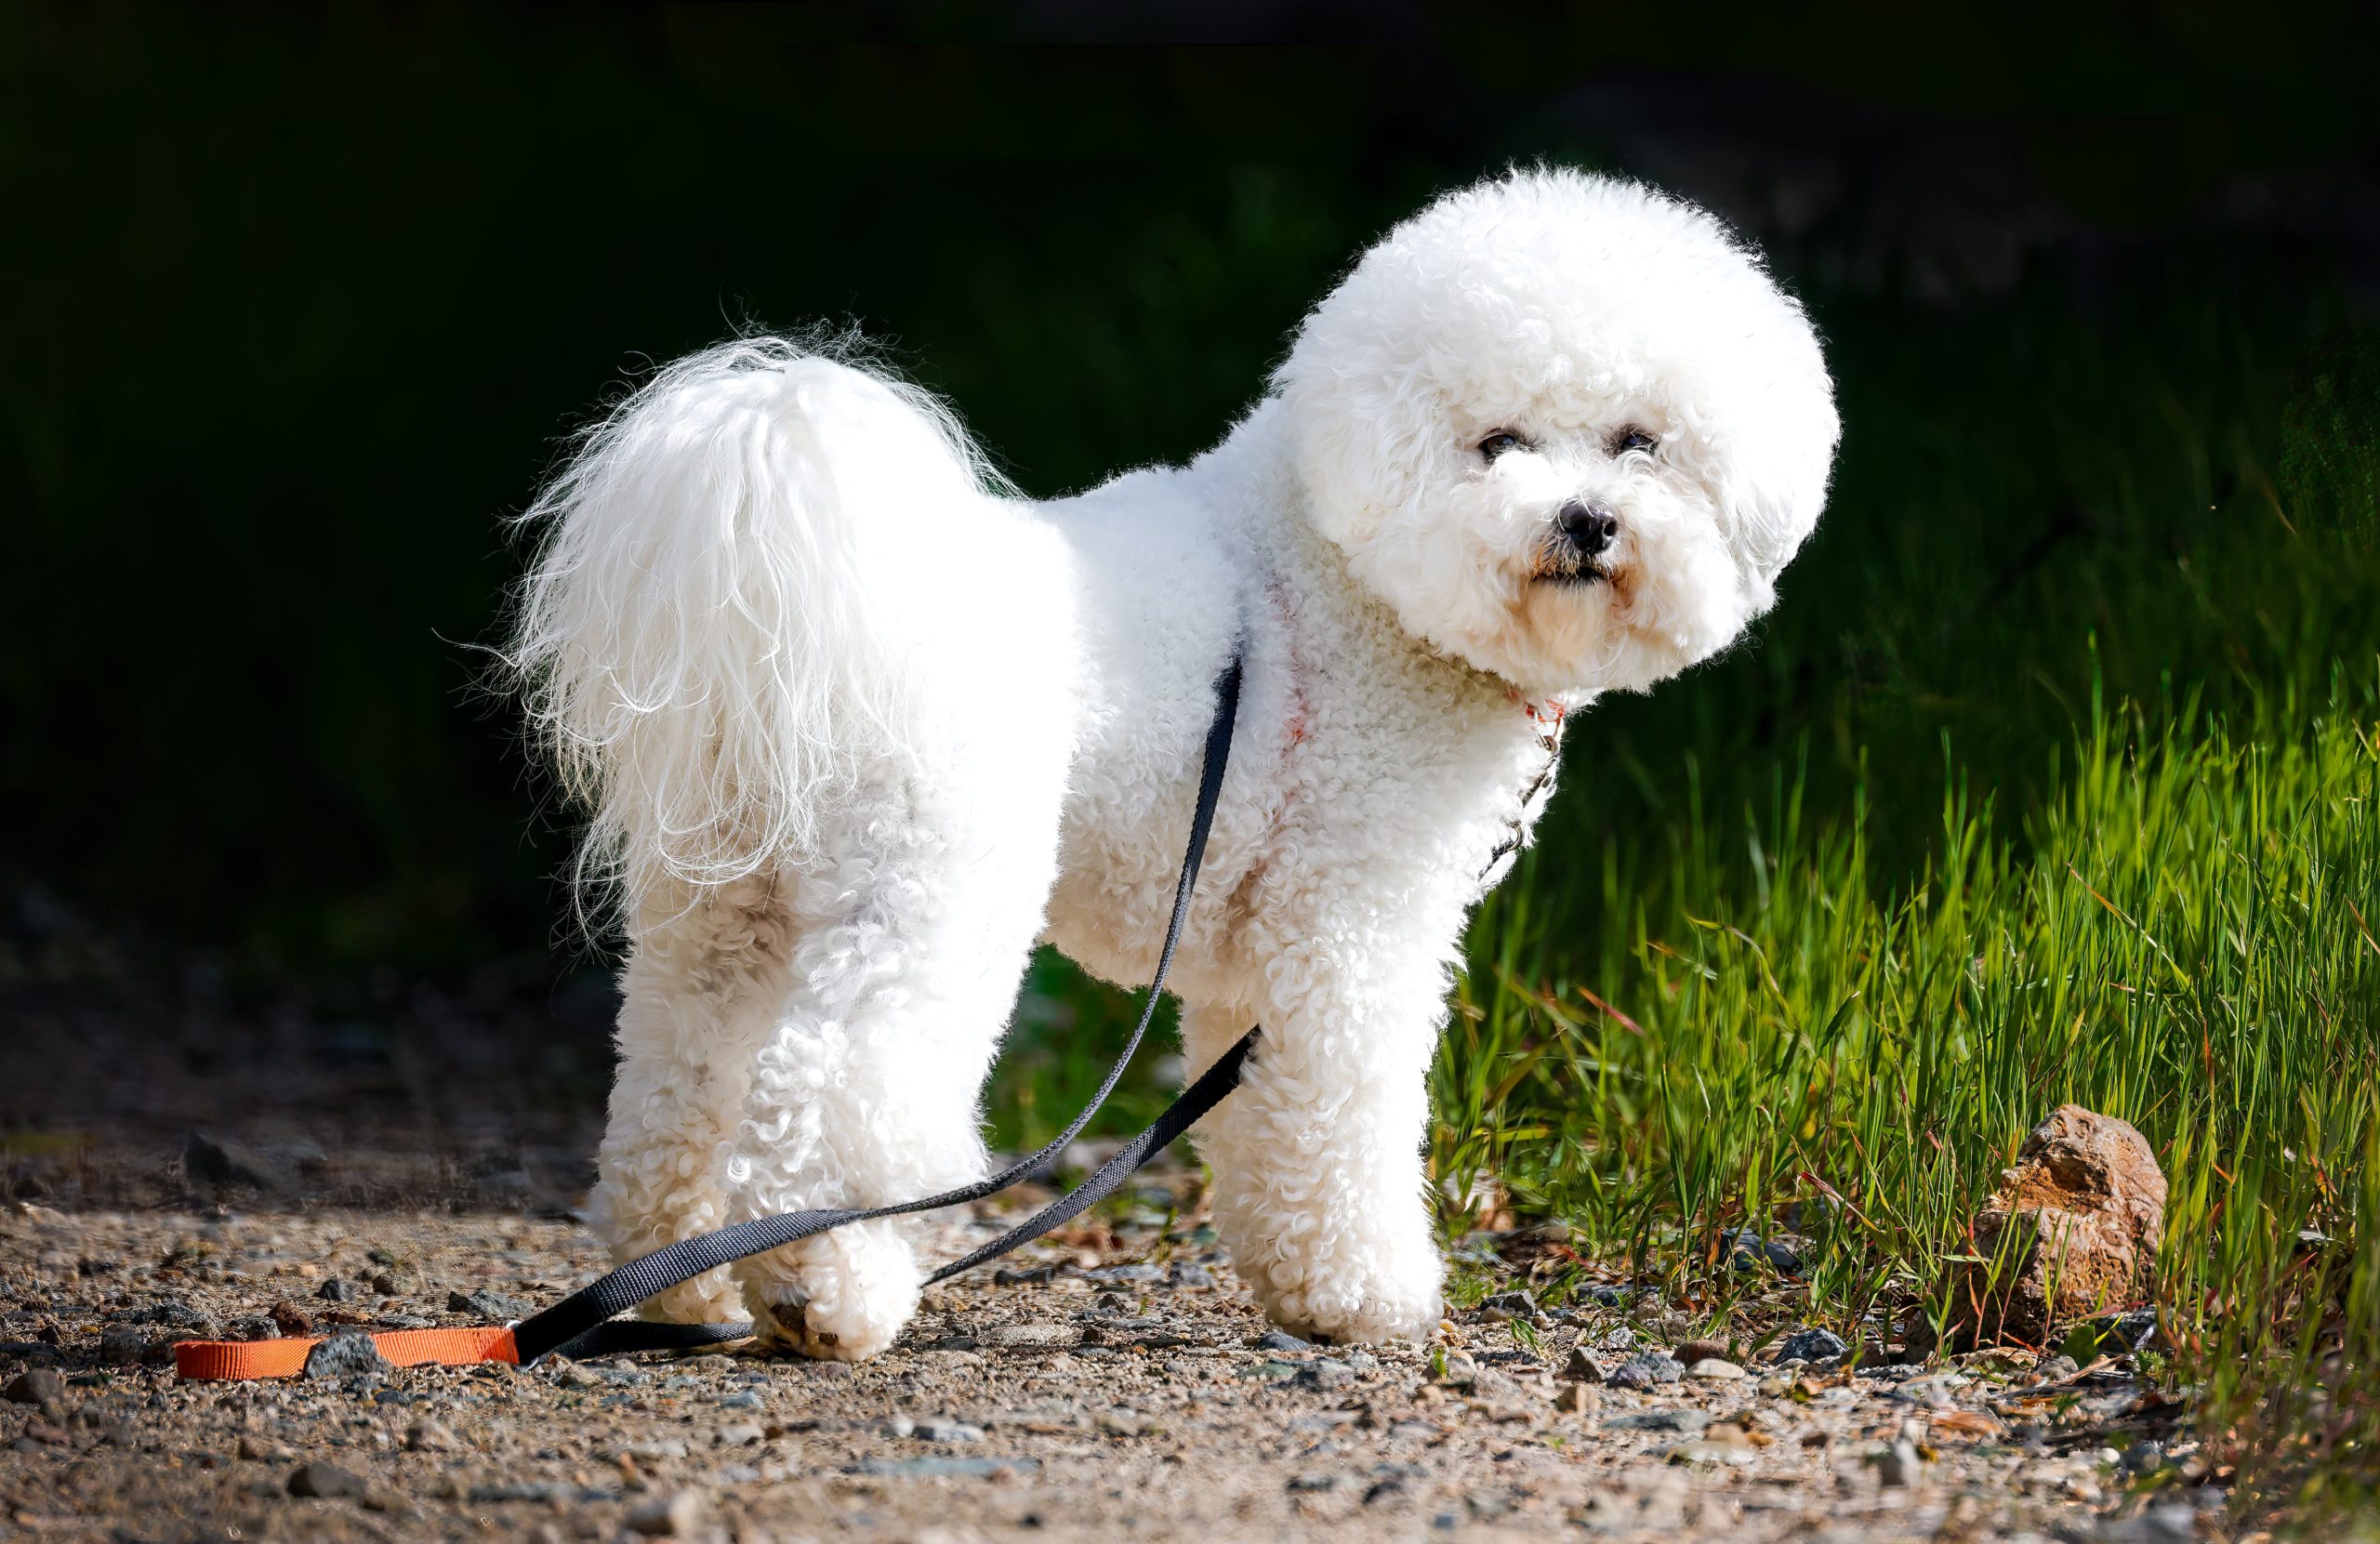 The bichon frise enjoys being on walks through the park to play and sniff around